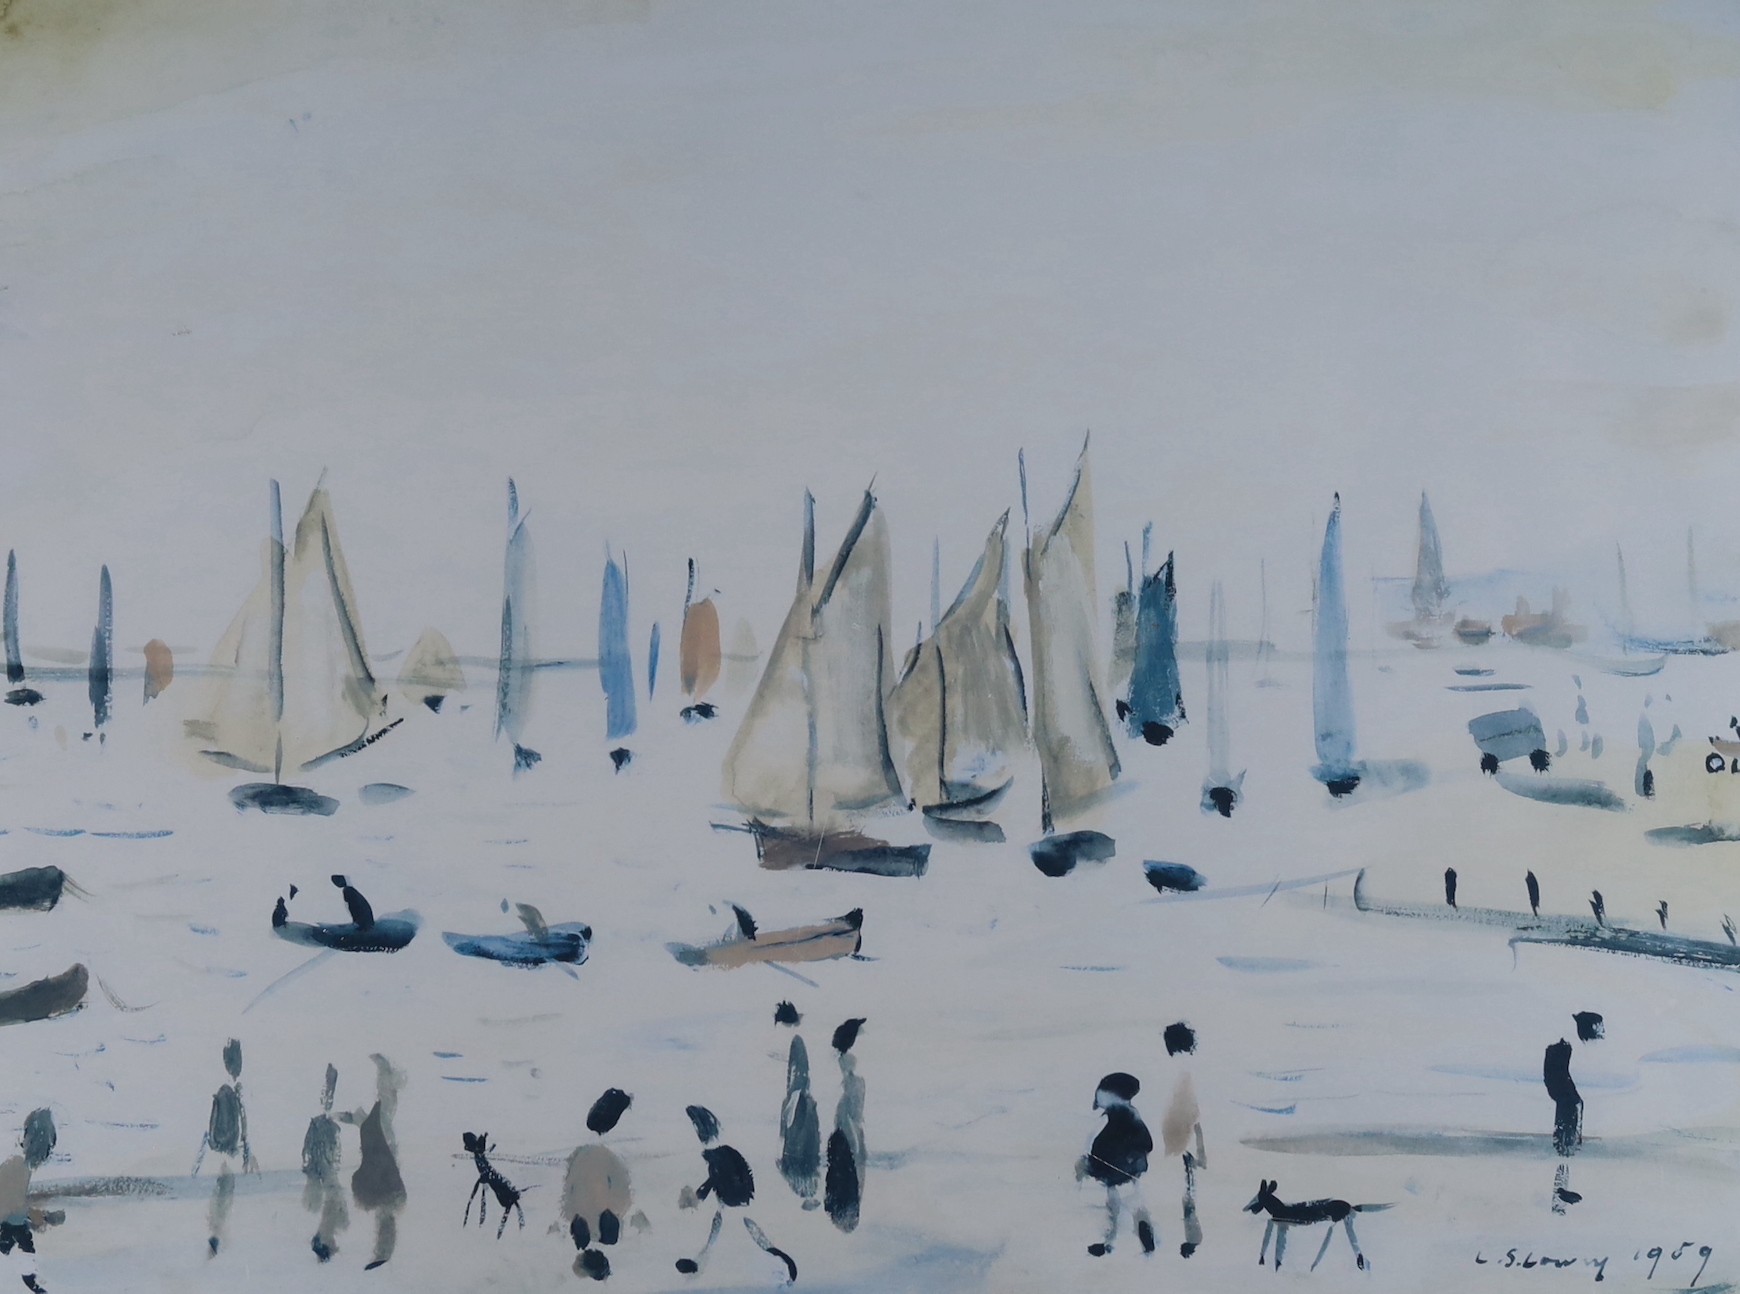 Lawrence Stephen Lowry, limited edition print, 'Yachts, 1959', blindstamped and numbered 573-850, 46 x 60cm